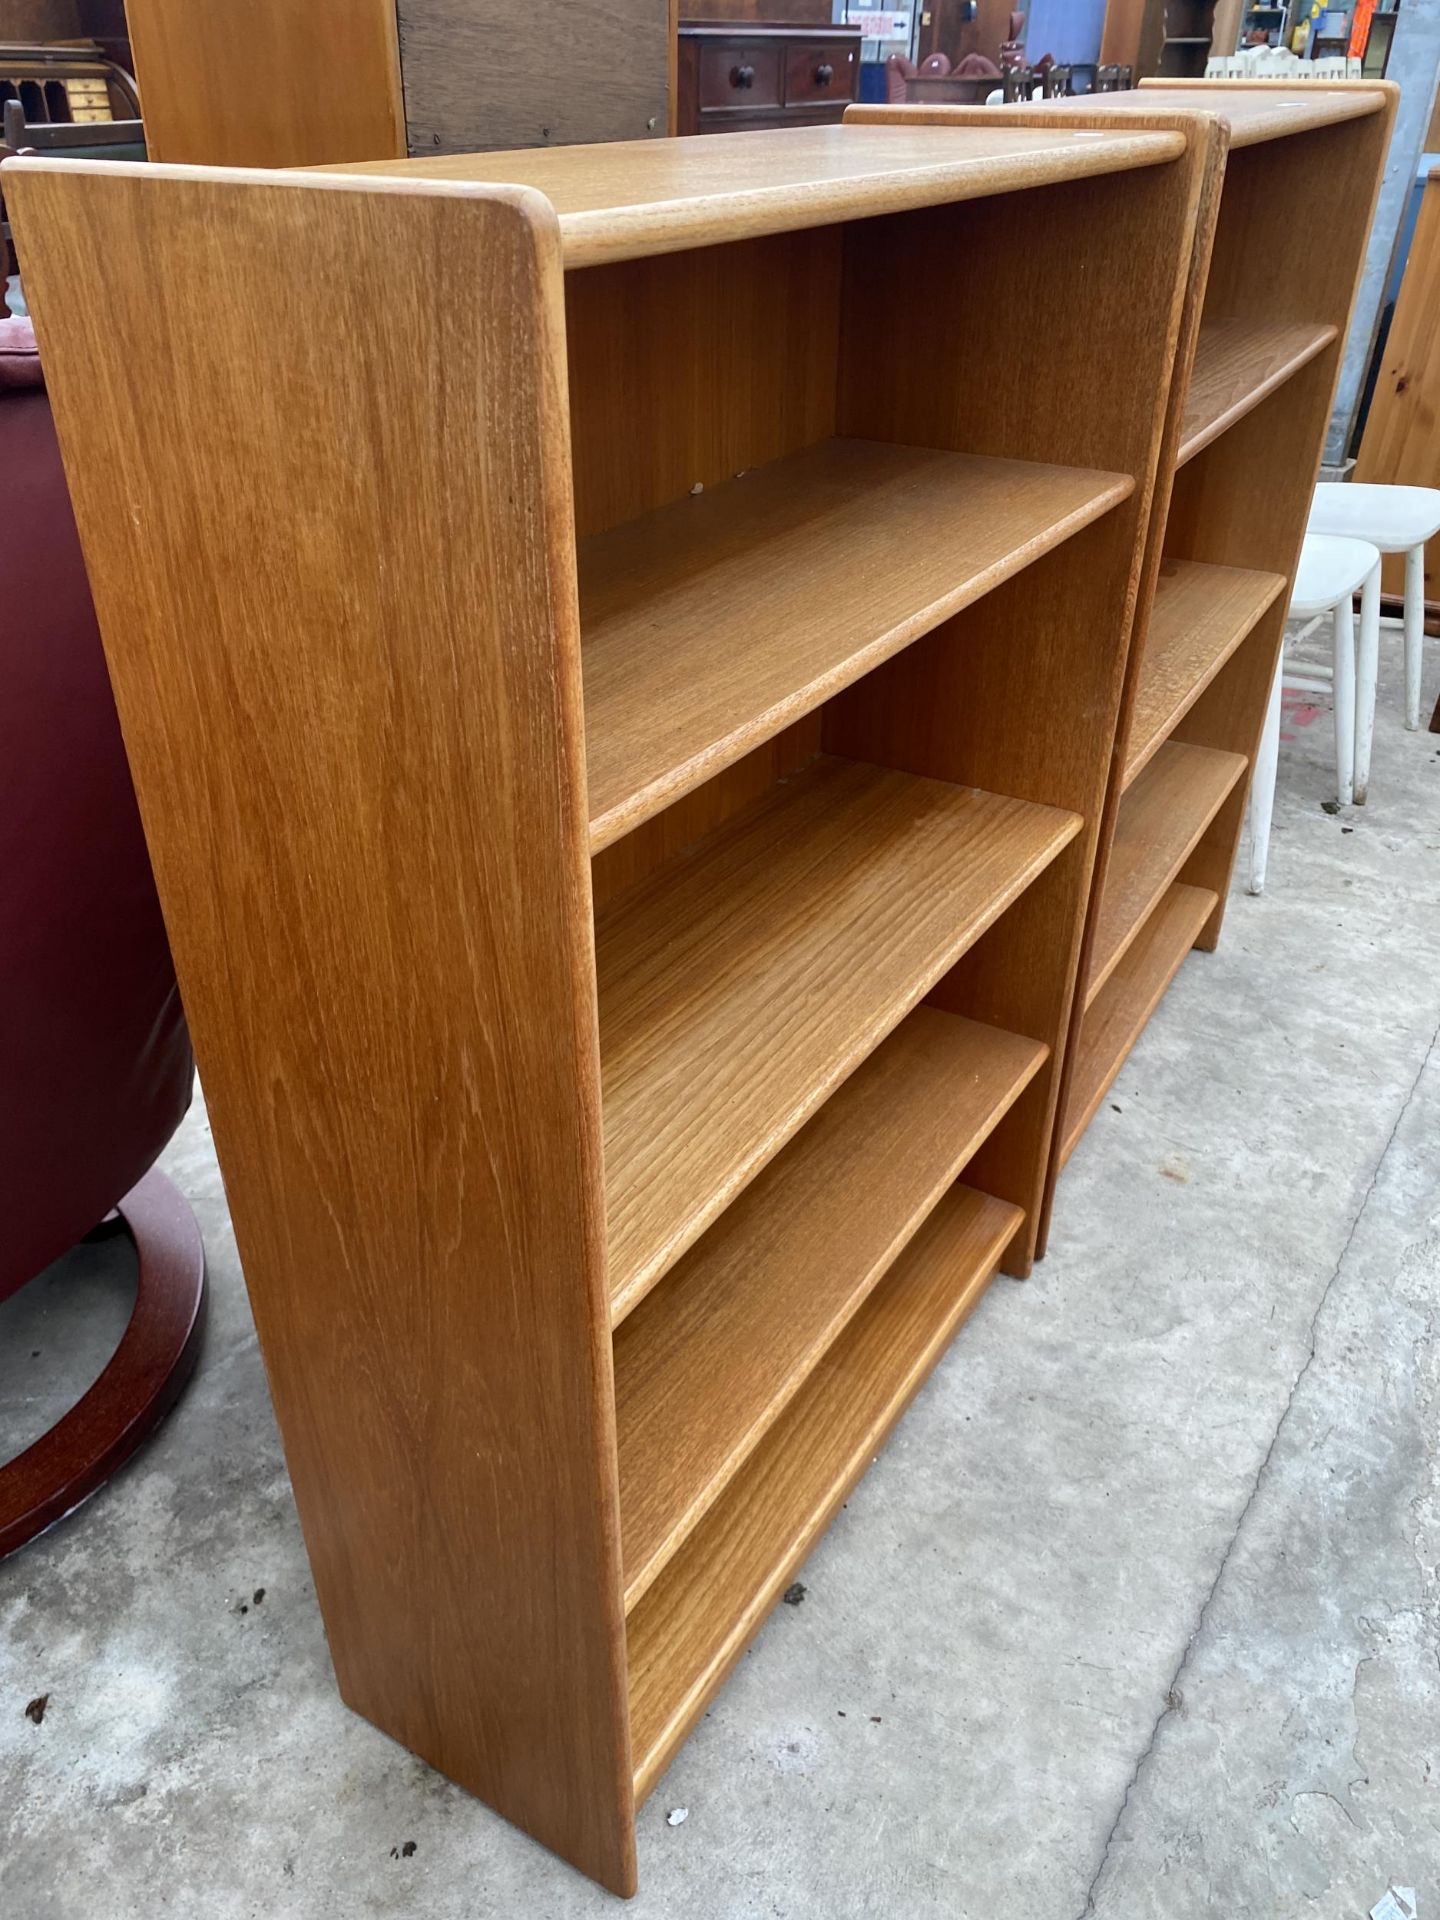 A PAIR OF TEAK OPEN FOUR TIER BOOKCASES, 30" WIDE EACH - Image 3 of 3